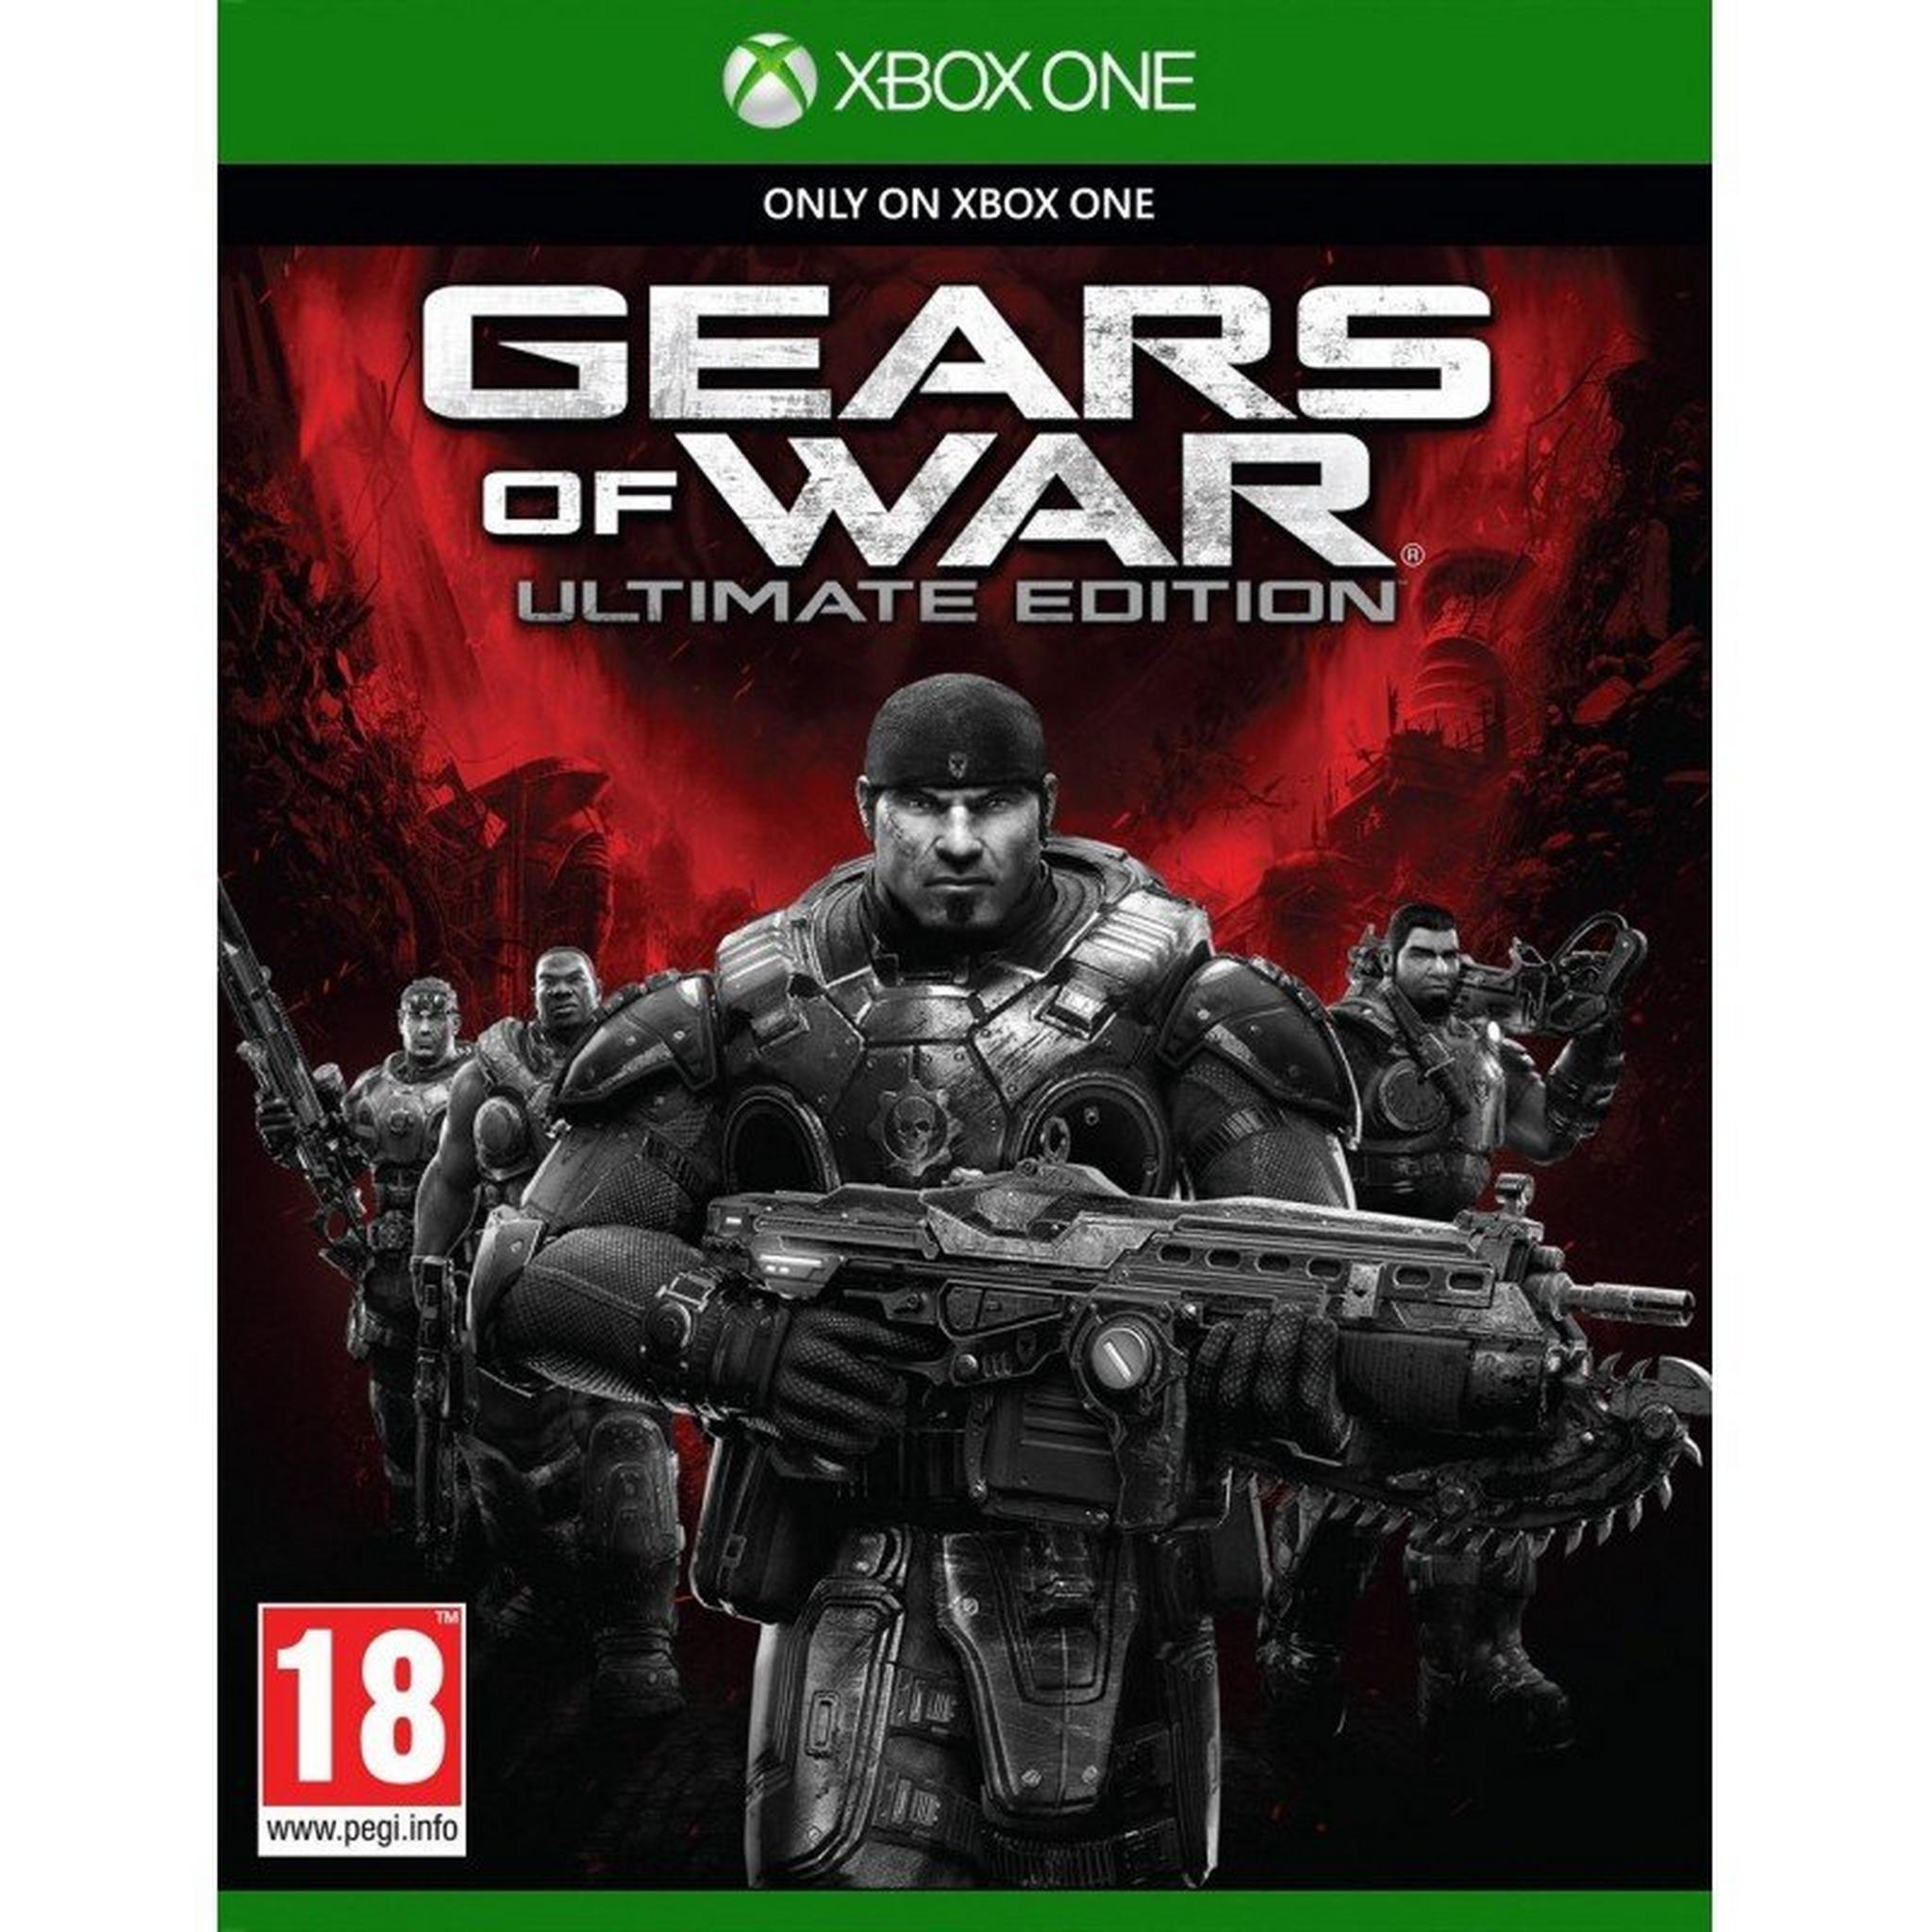 Gears of War Ultimate Edition - Xbox One Game